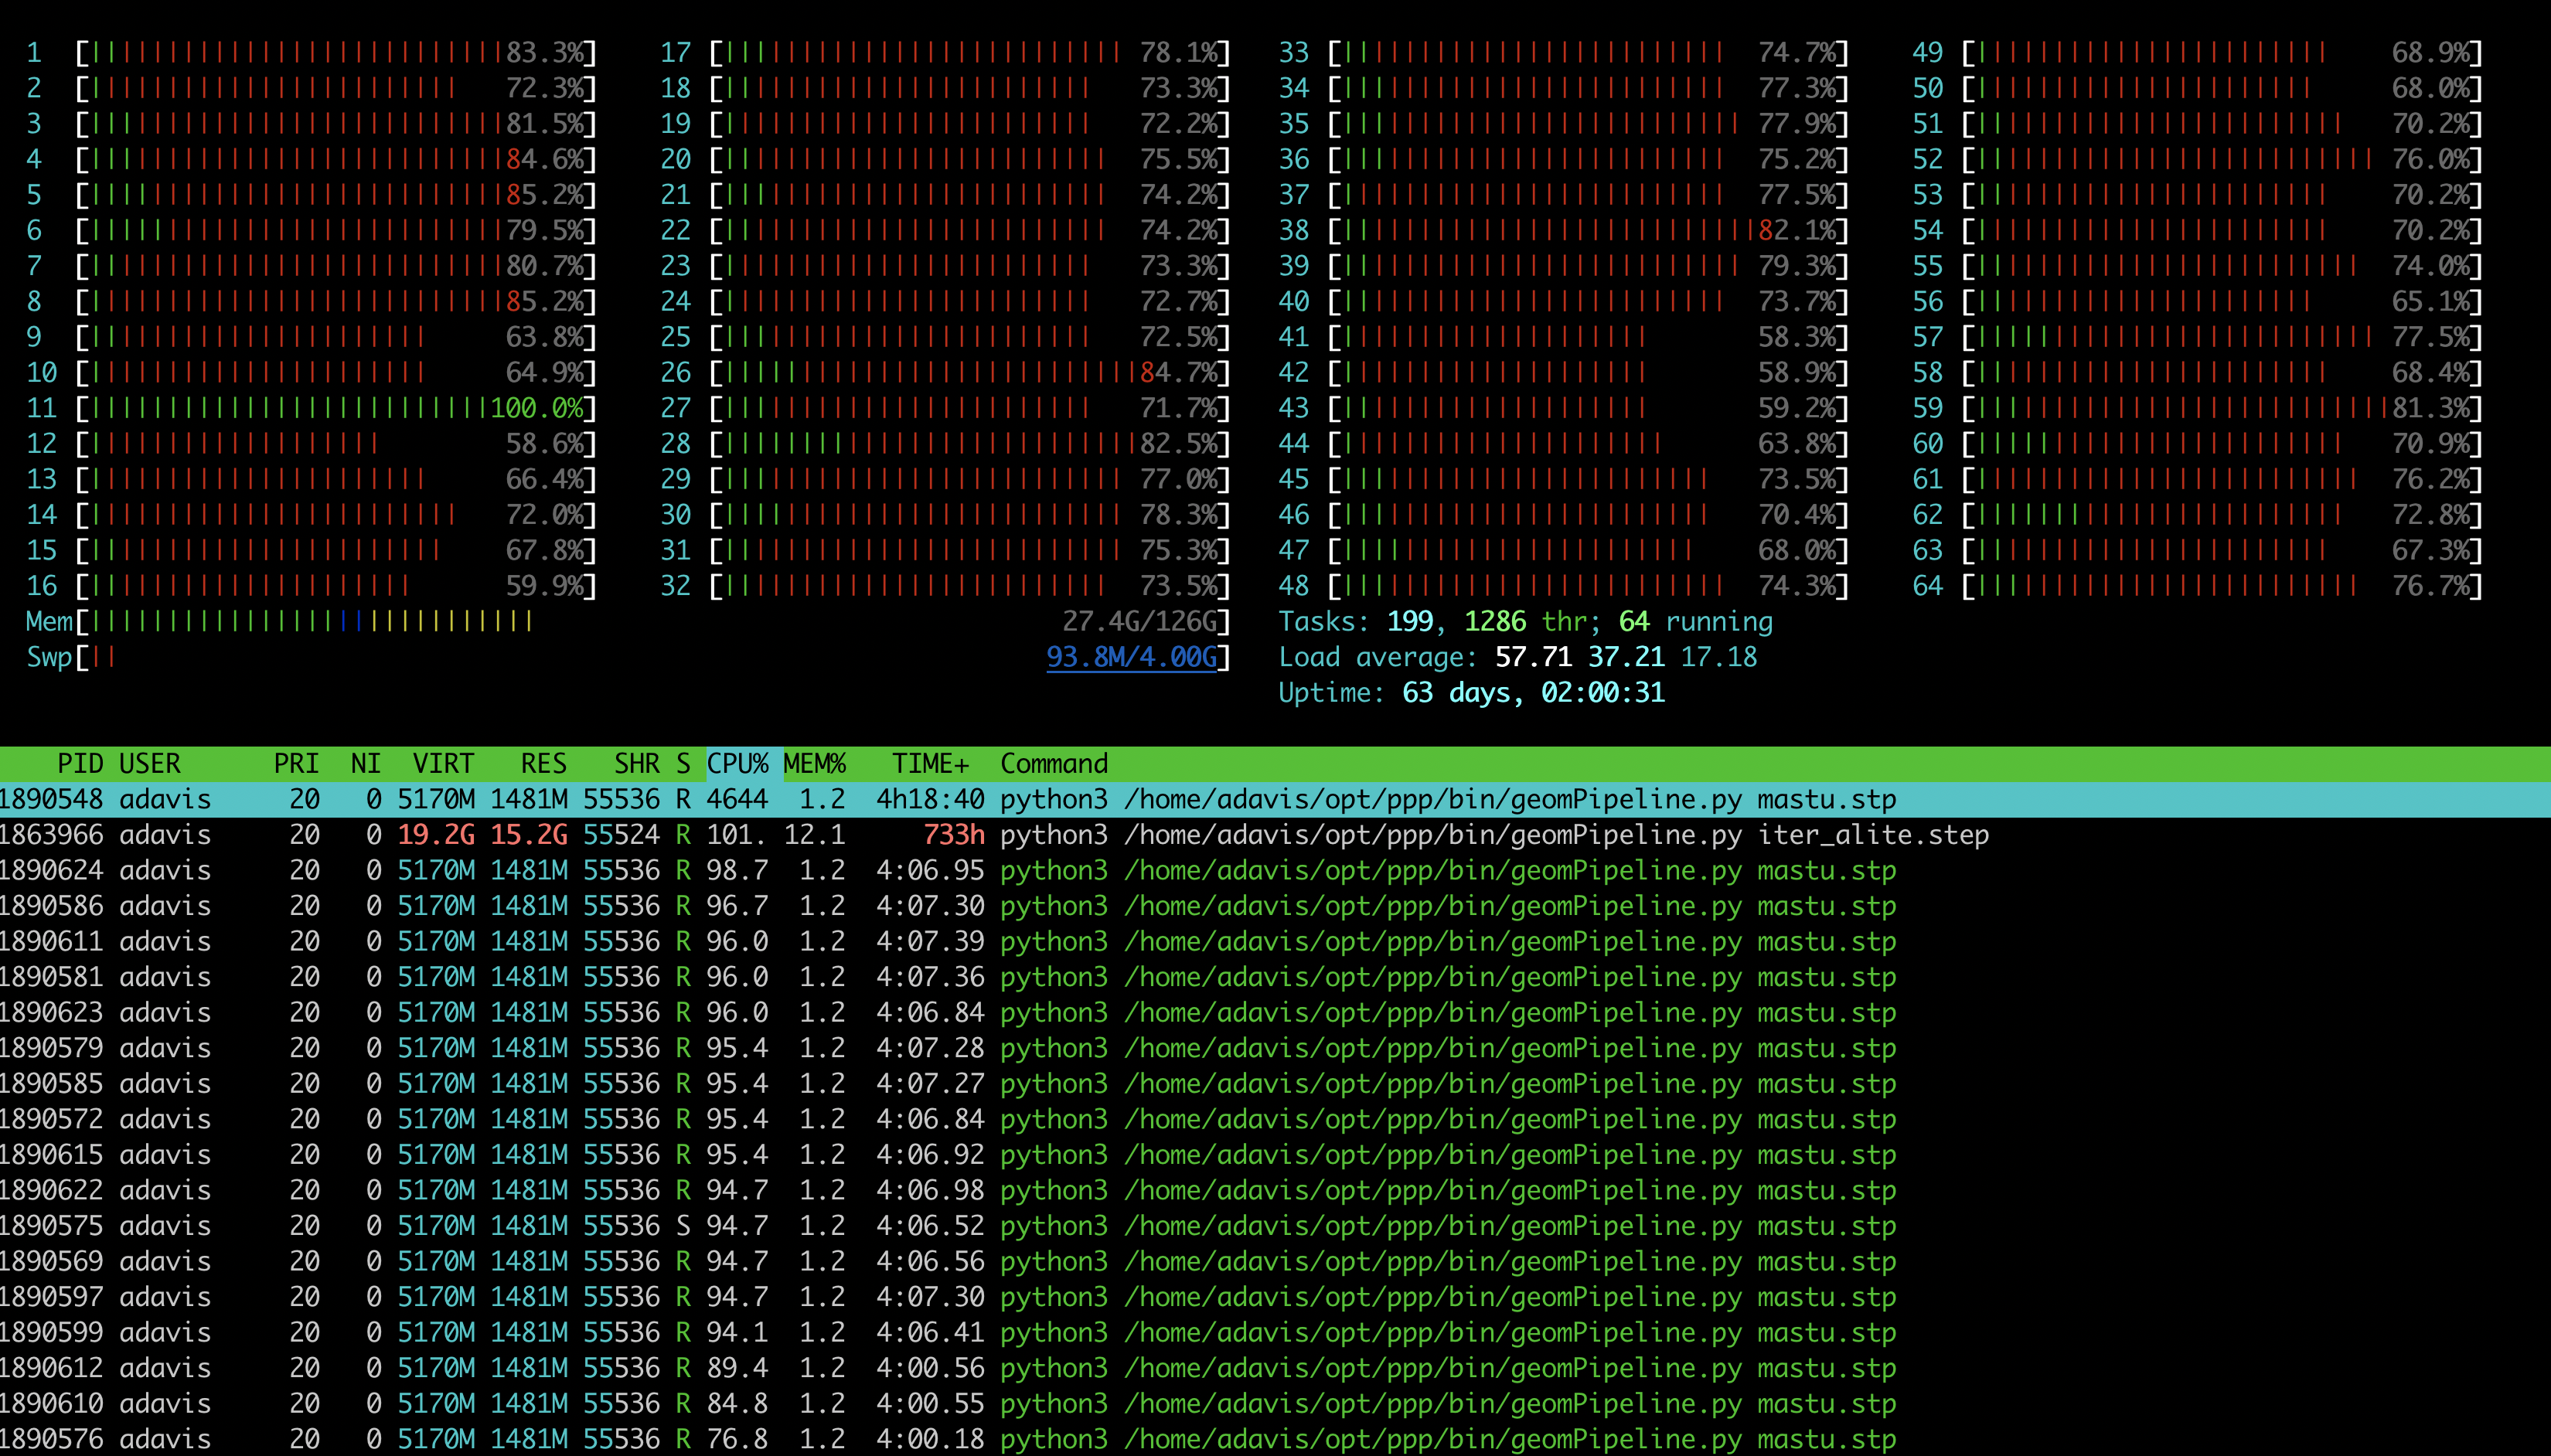 CPU usage of parallel-preprocessor using 64 threads on a 32-core CPU